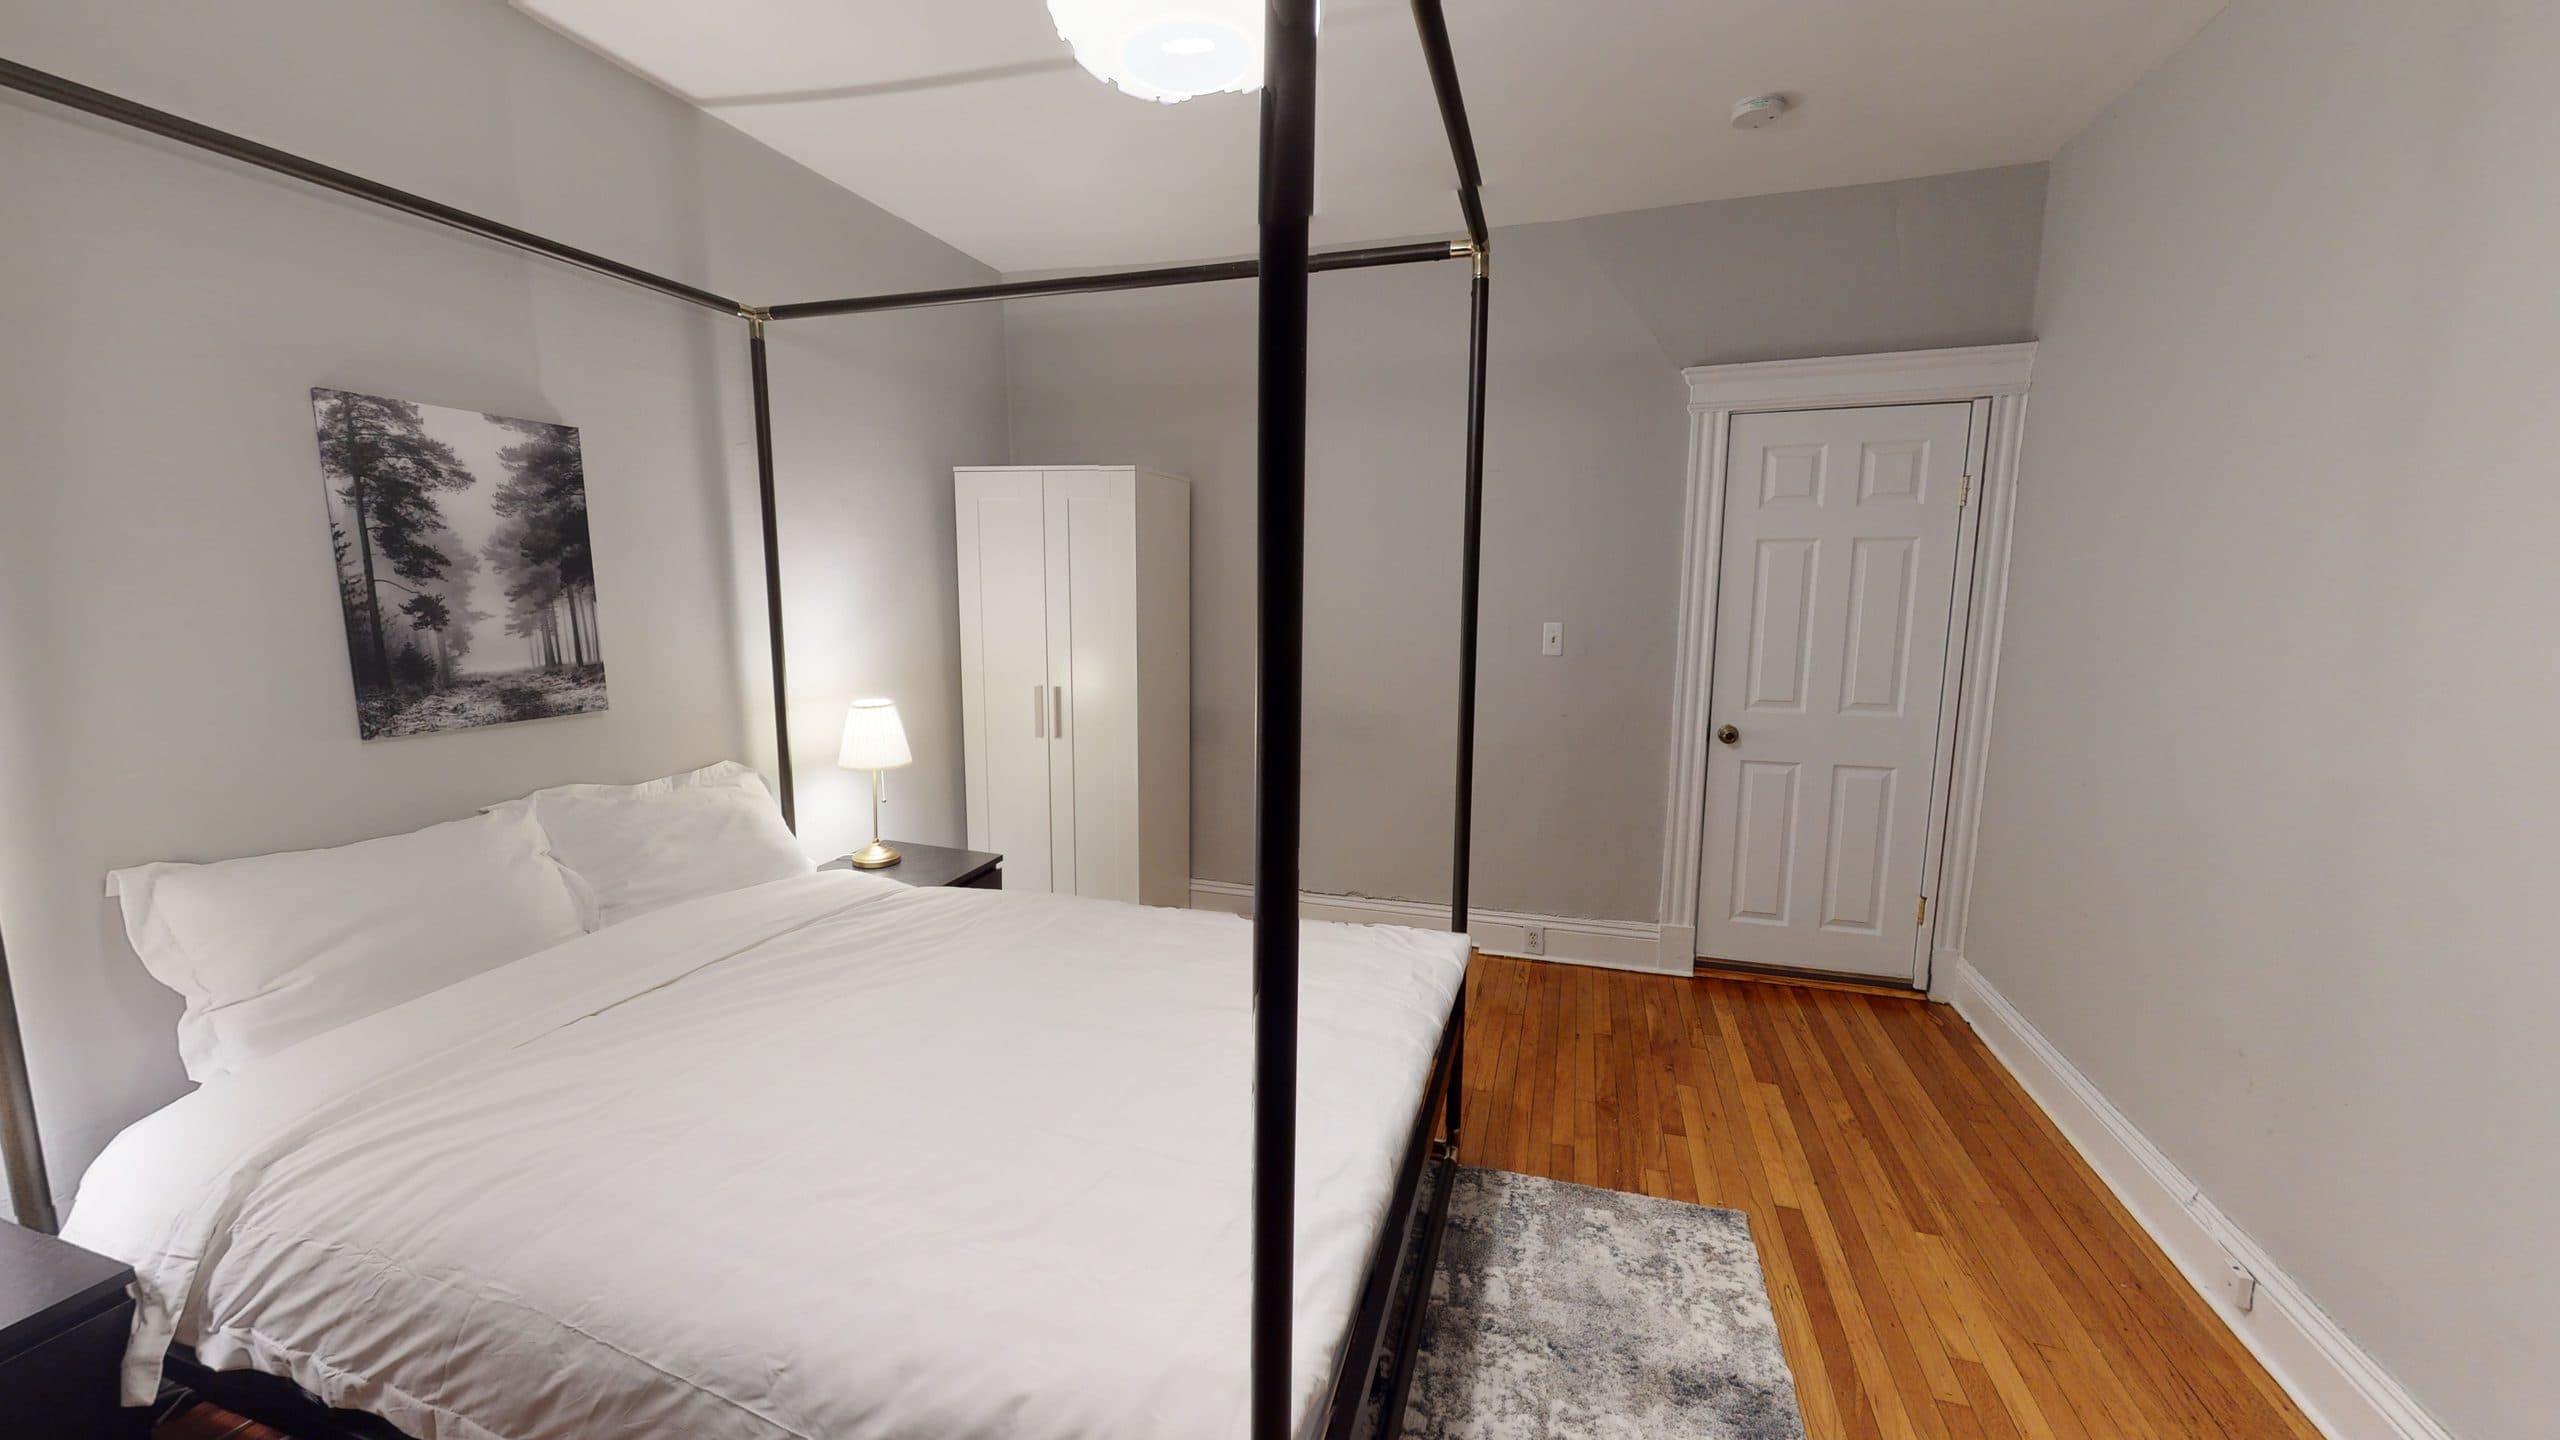 Photo 19 of #1293: Queen Bedroom 4A at June Homes